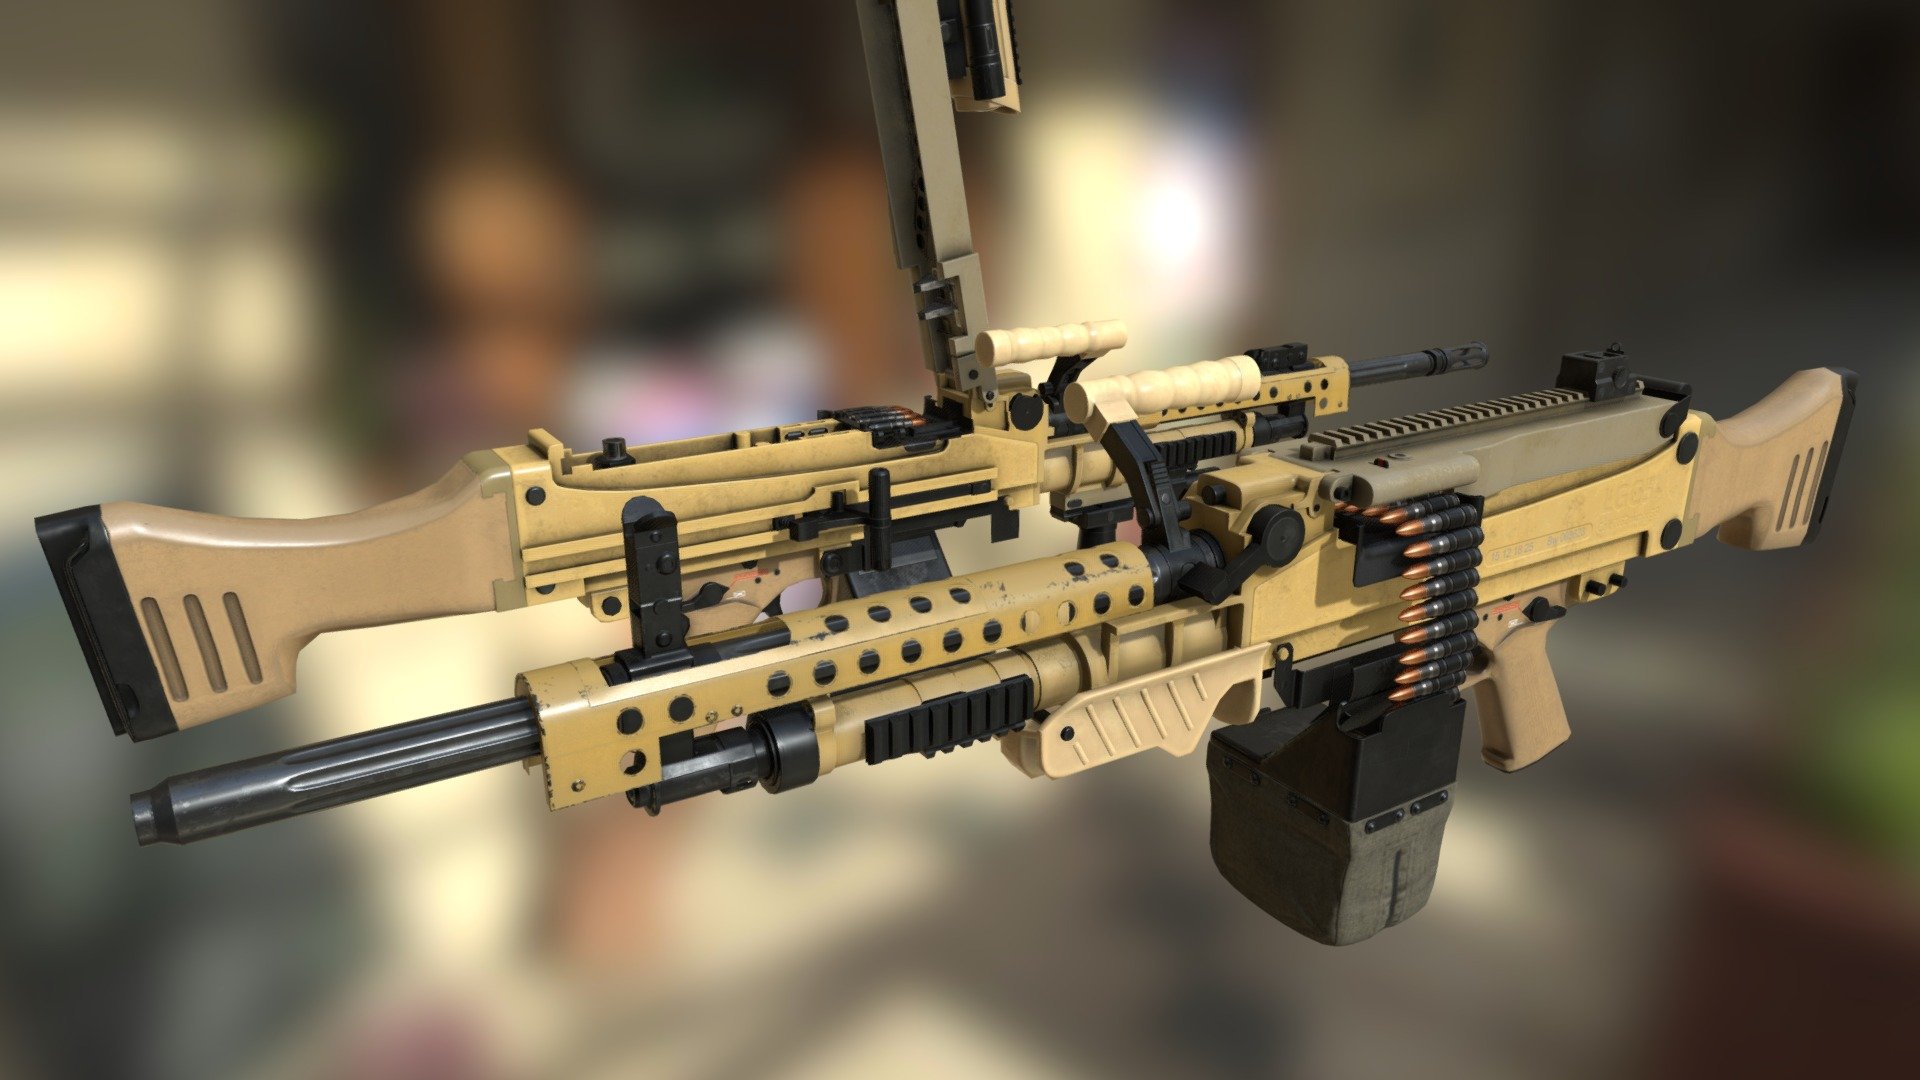 A model I made for SCP Secret Laboratory's Parabellum update, or 11.0. This model is based on the HK MG5, and replaced an older version of the Logicer made by another artist that had been in the game for quite some time.

This model was a major step up for me, both in complexity and in execution. I faced quite a few challenges in its creation, but am quite happy with the result. 

I've also created a set of first-person animations for the model, which are used in-game. 
You can find a video of them here: https://www.artstation.com/artwork/rA8La5

Modeled in Blender 3D
Textured in Substance Painter
SCP SL by Northwood Studios - SCP Secret Laboratory - Logicer LMG (HK MG5) - 3D model by Mikel (@Da_Mikel) 3d model